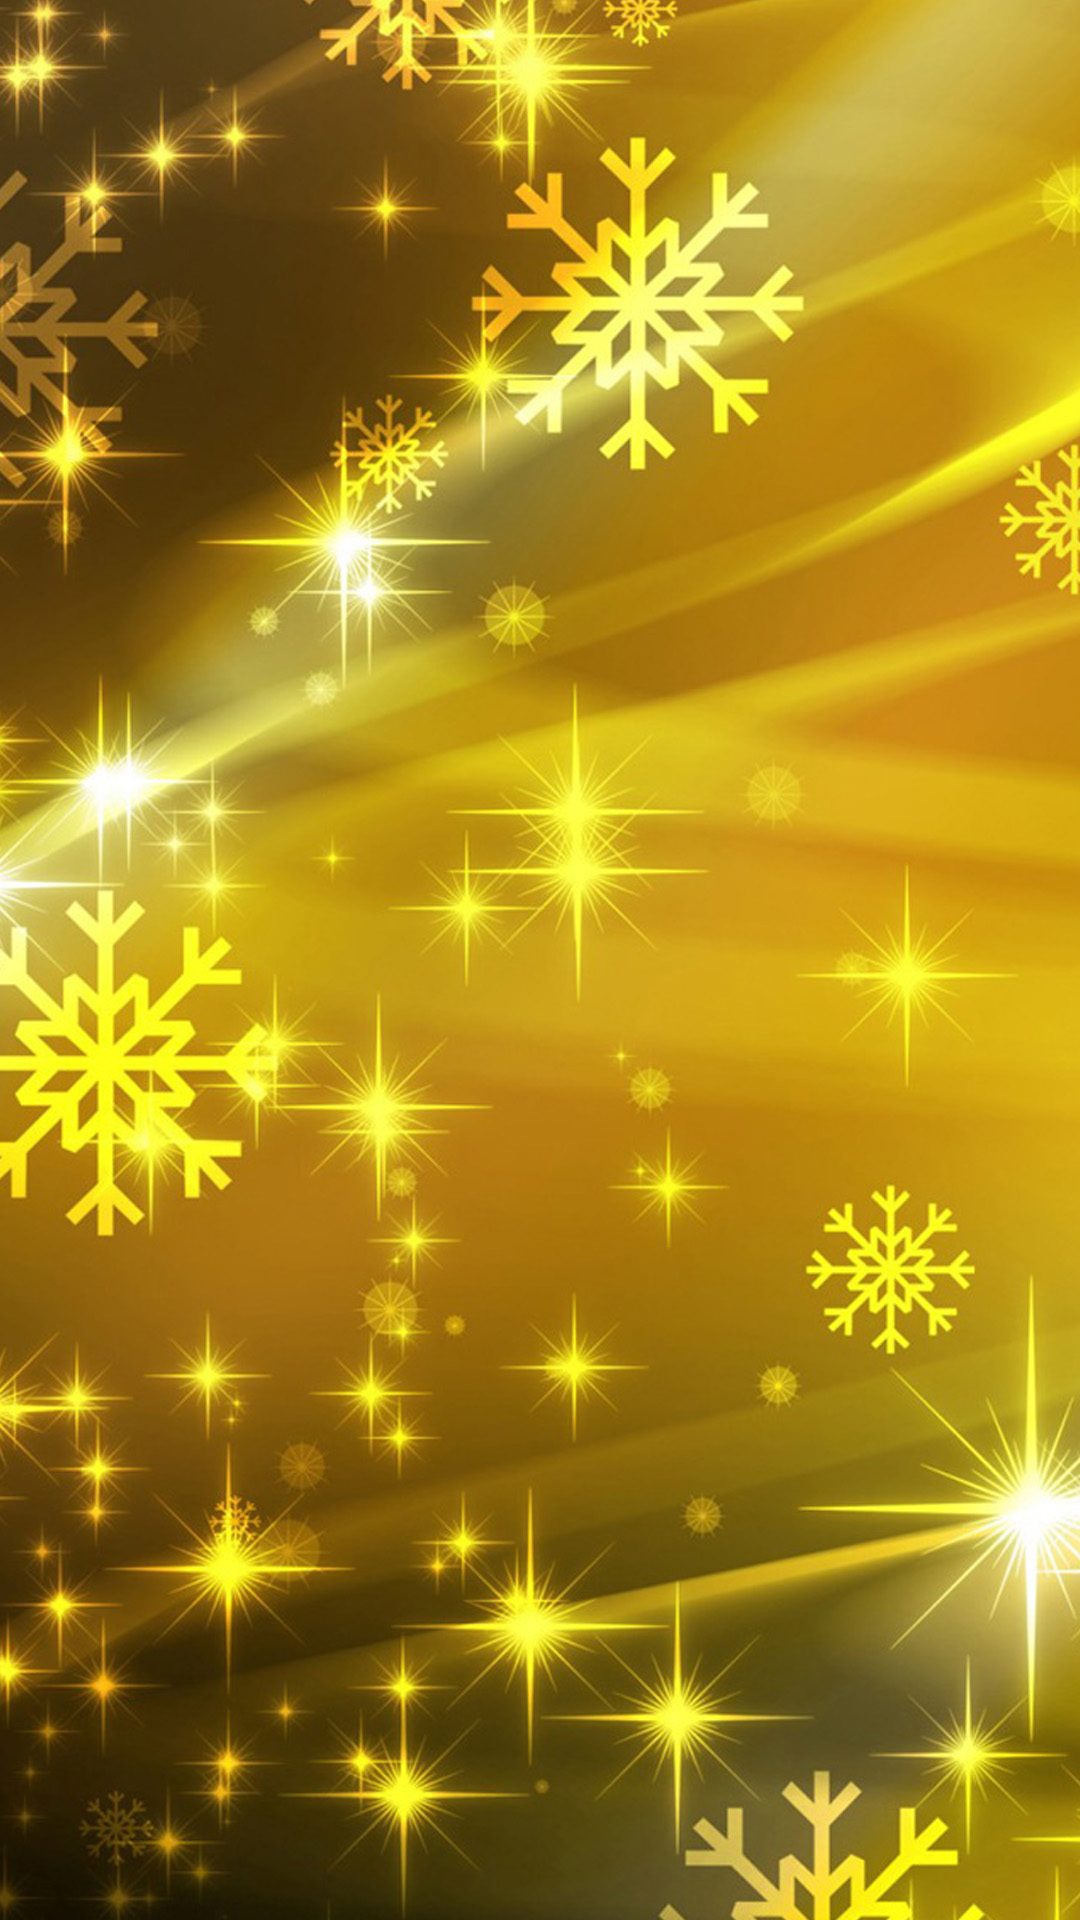 colorful wallpaper for android,light,yellow,gold,pattern,christmas decoration